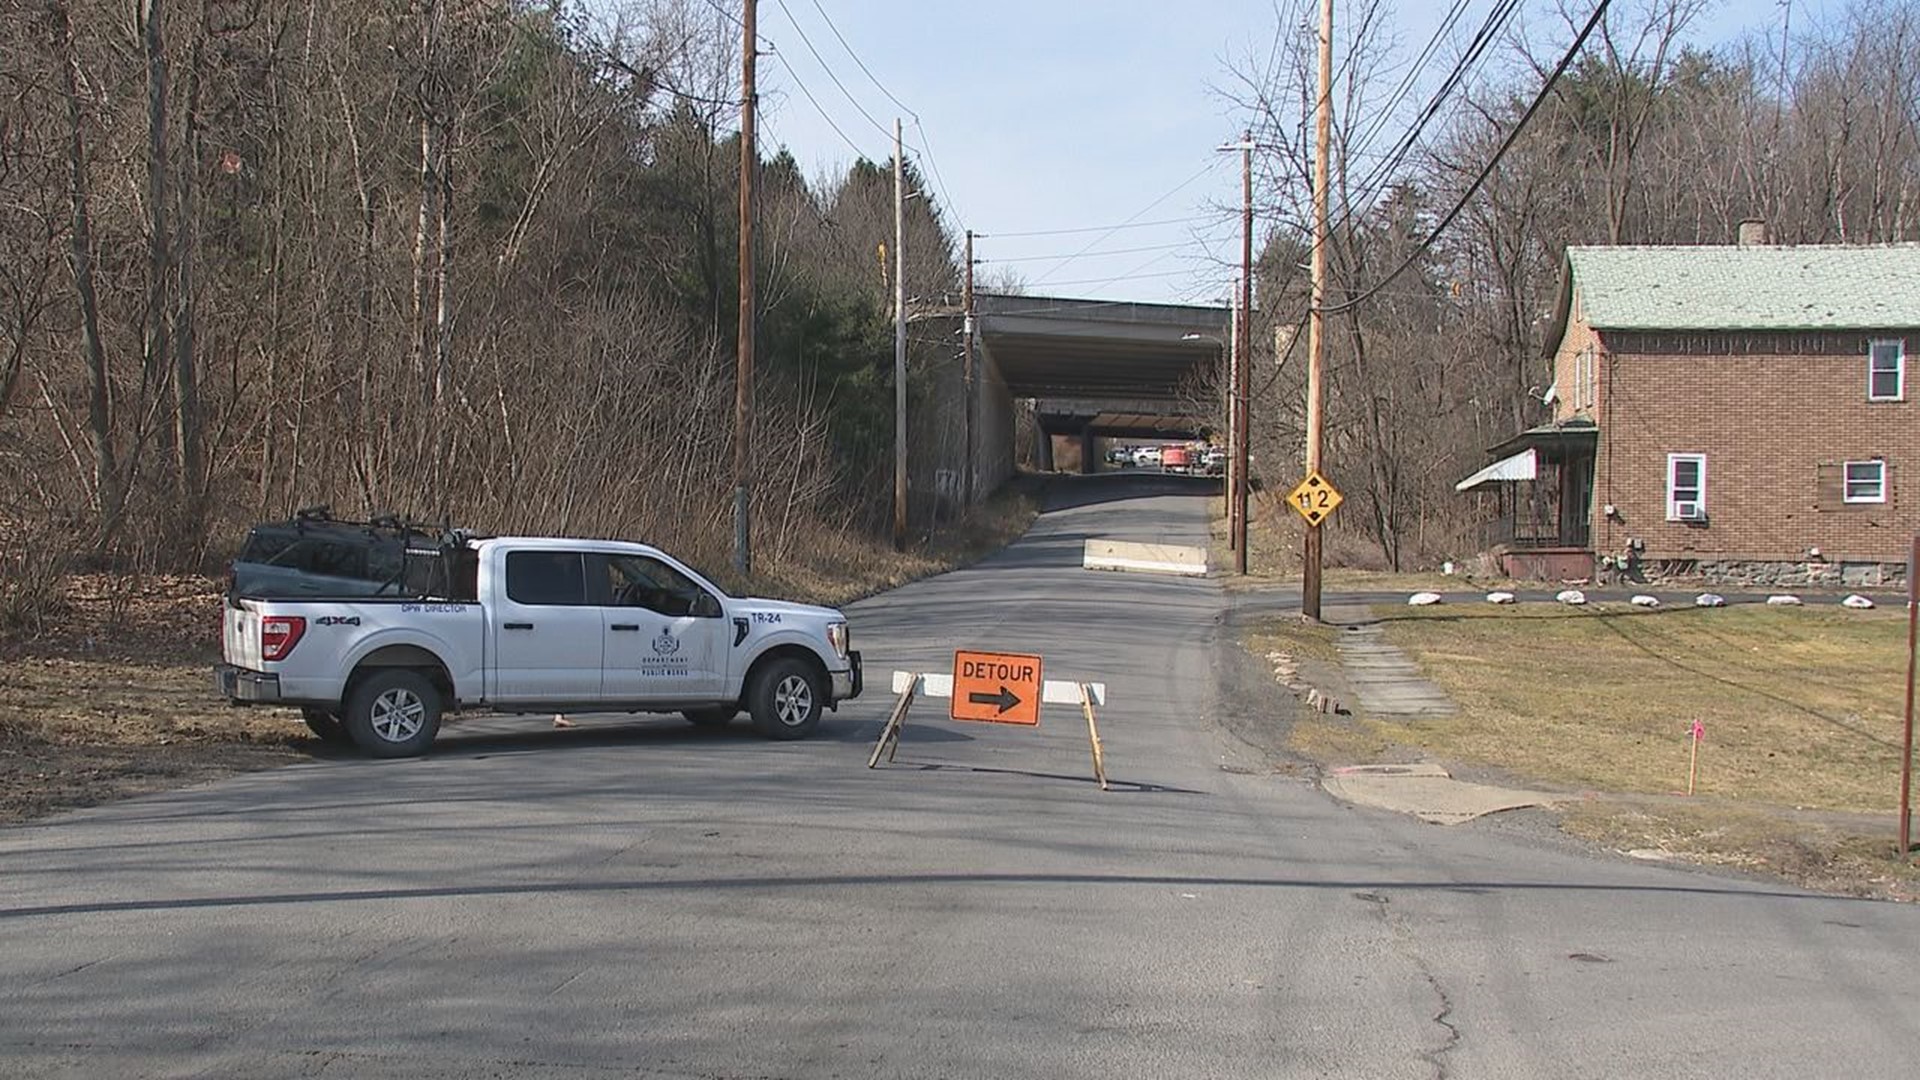 Scranton officials closed a section of Theodore Street while repairs can be made to bridge.